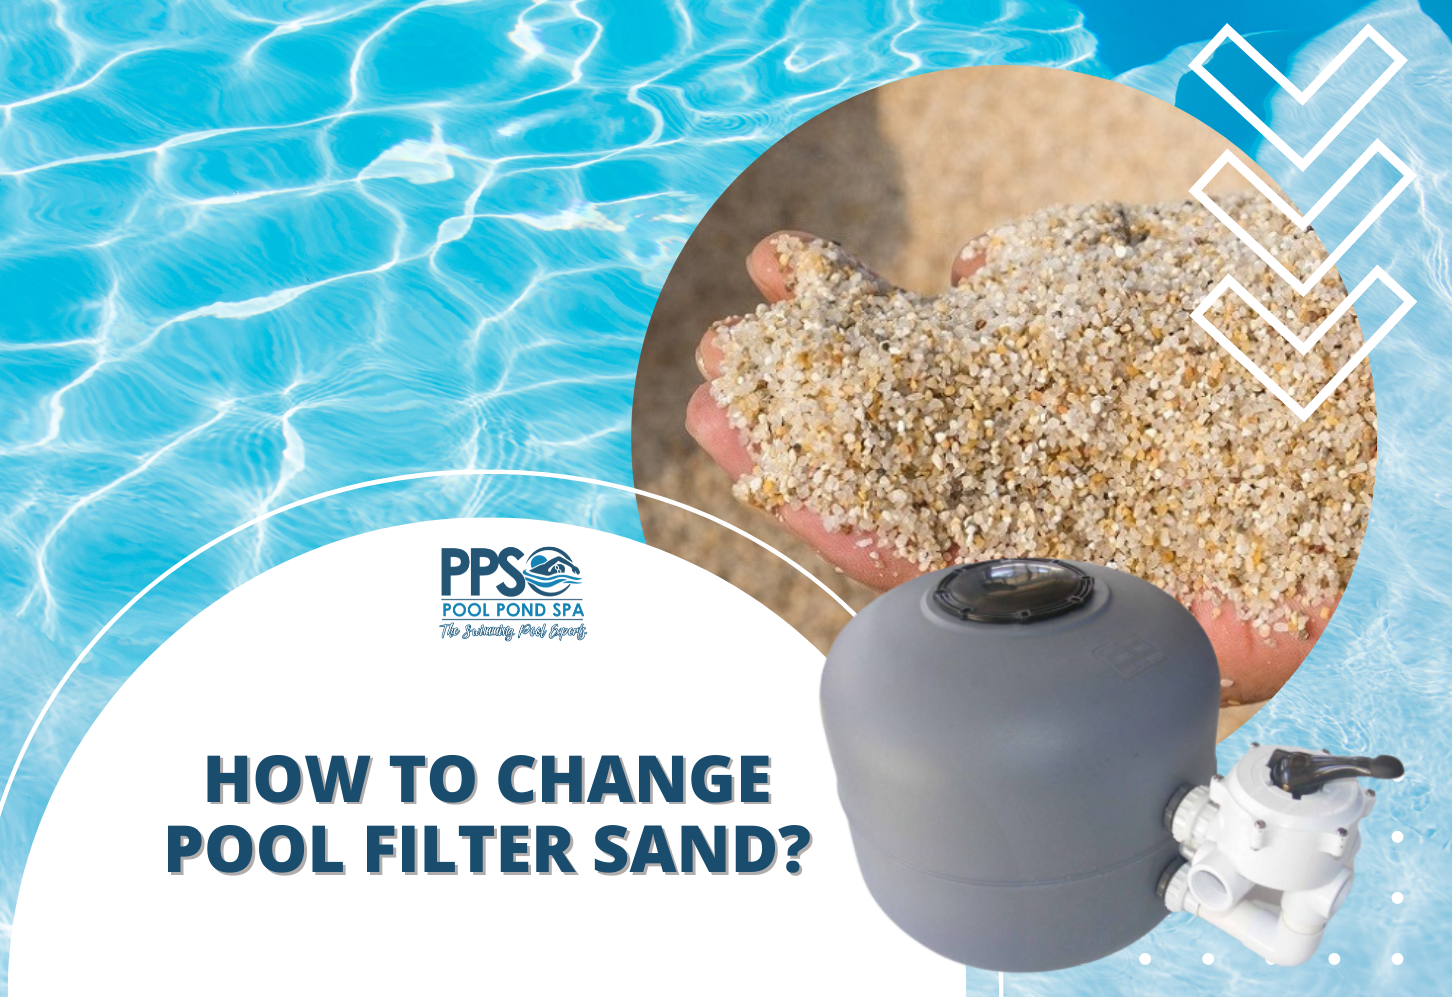 How to change pool filter sand